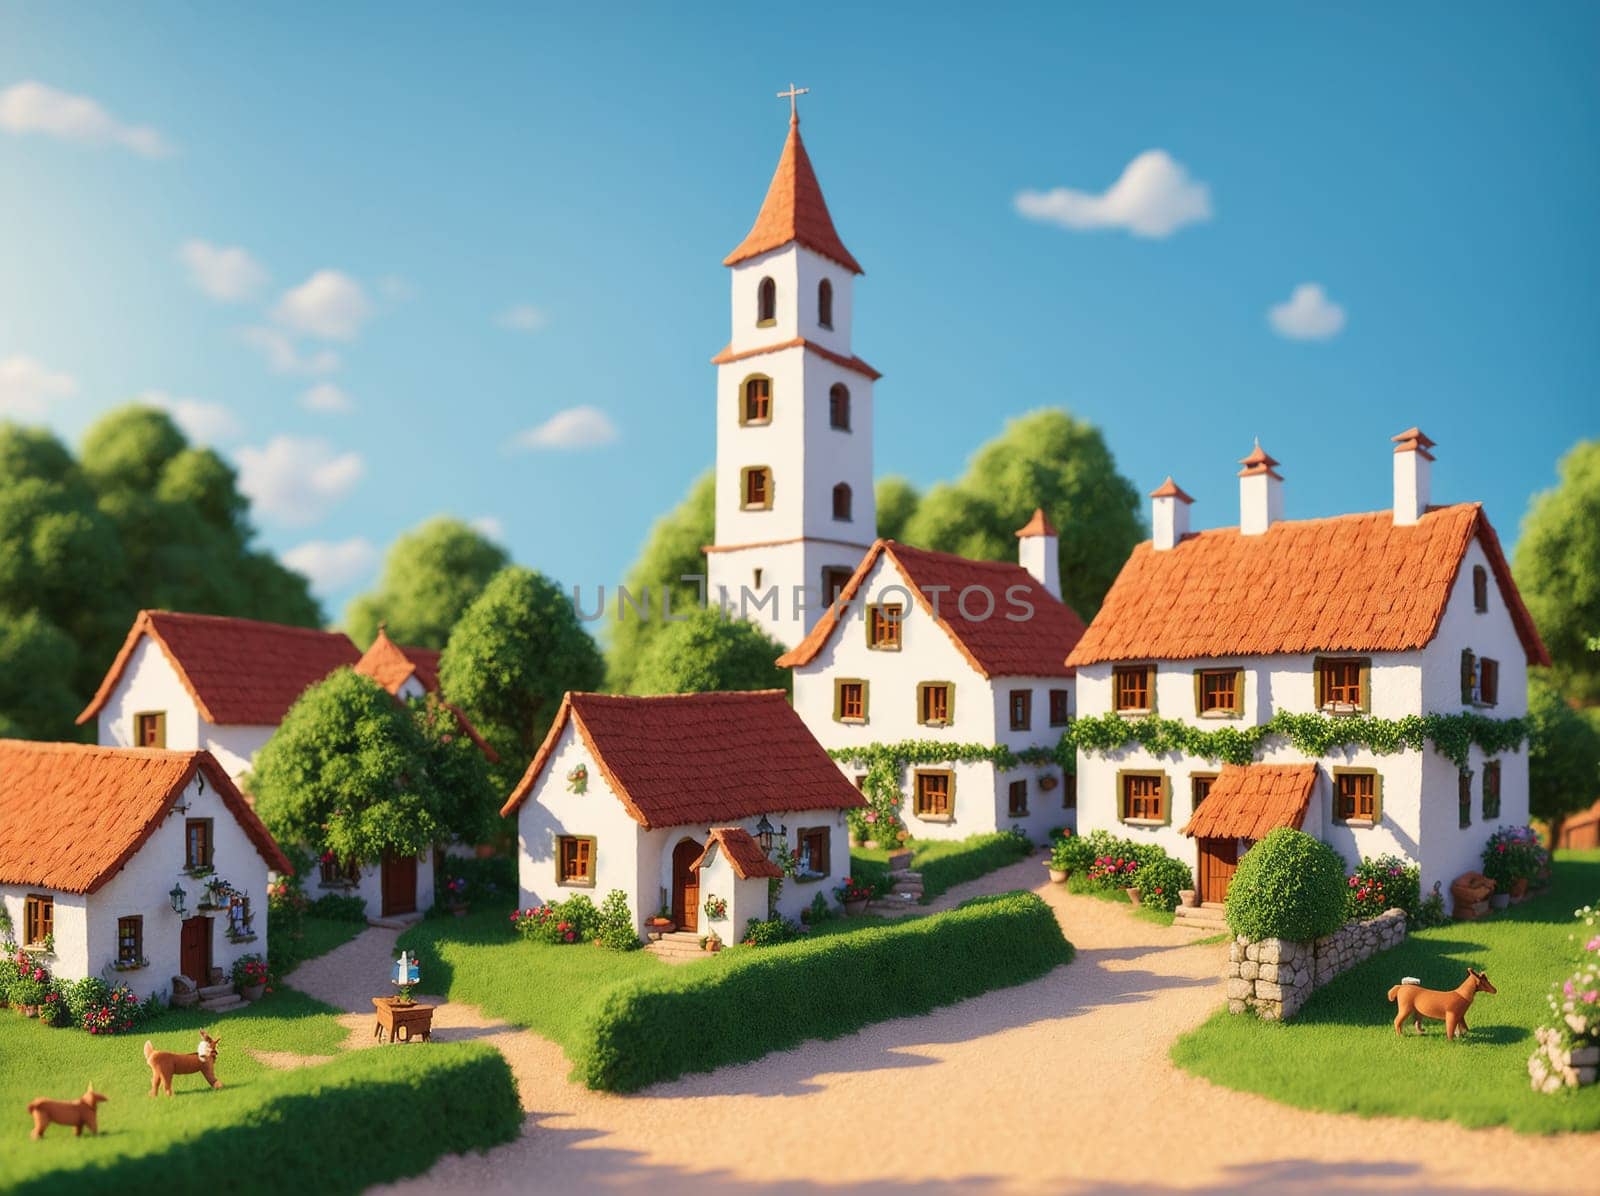 A small village with several houses and a church in the background. by creart